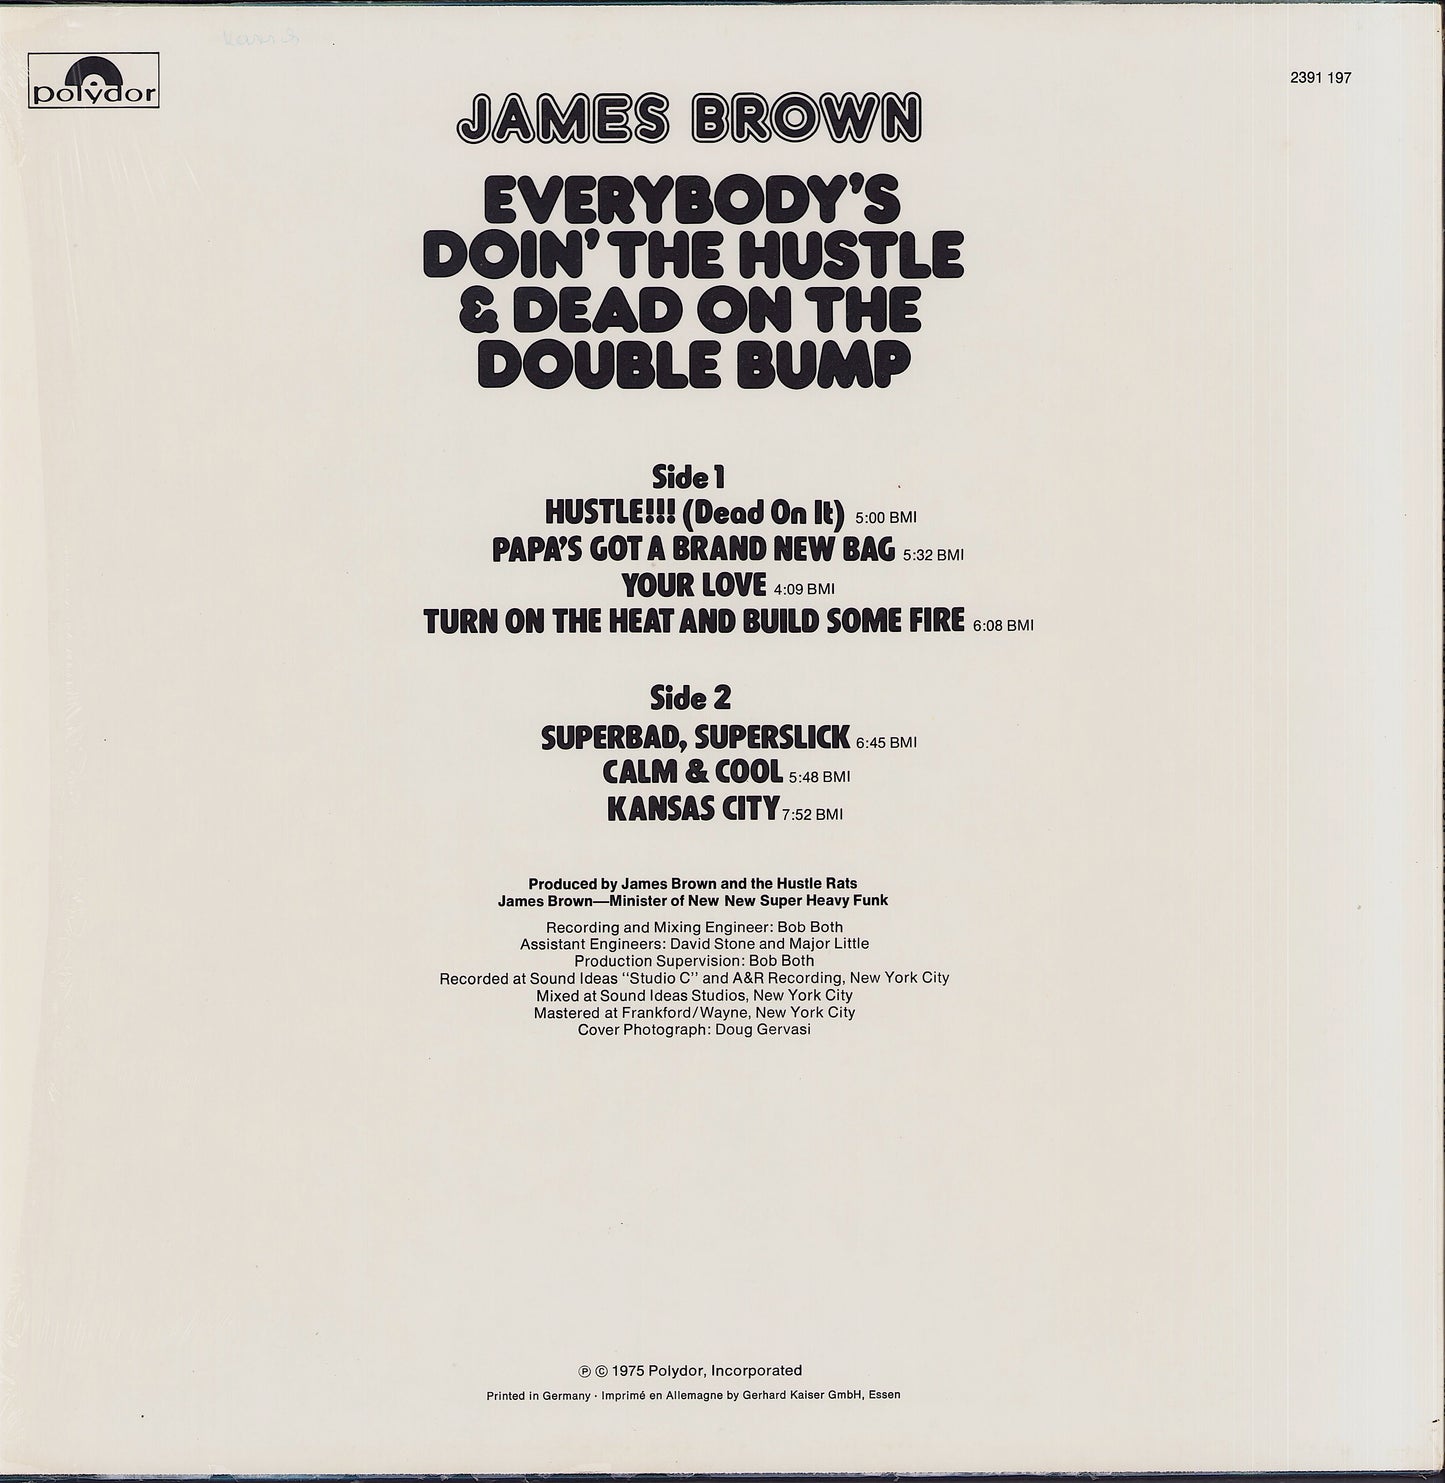 James Brown - Everybody's Doin' The Hustle & Dead On The Double Bump Vinyl LP